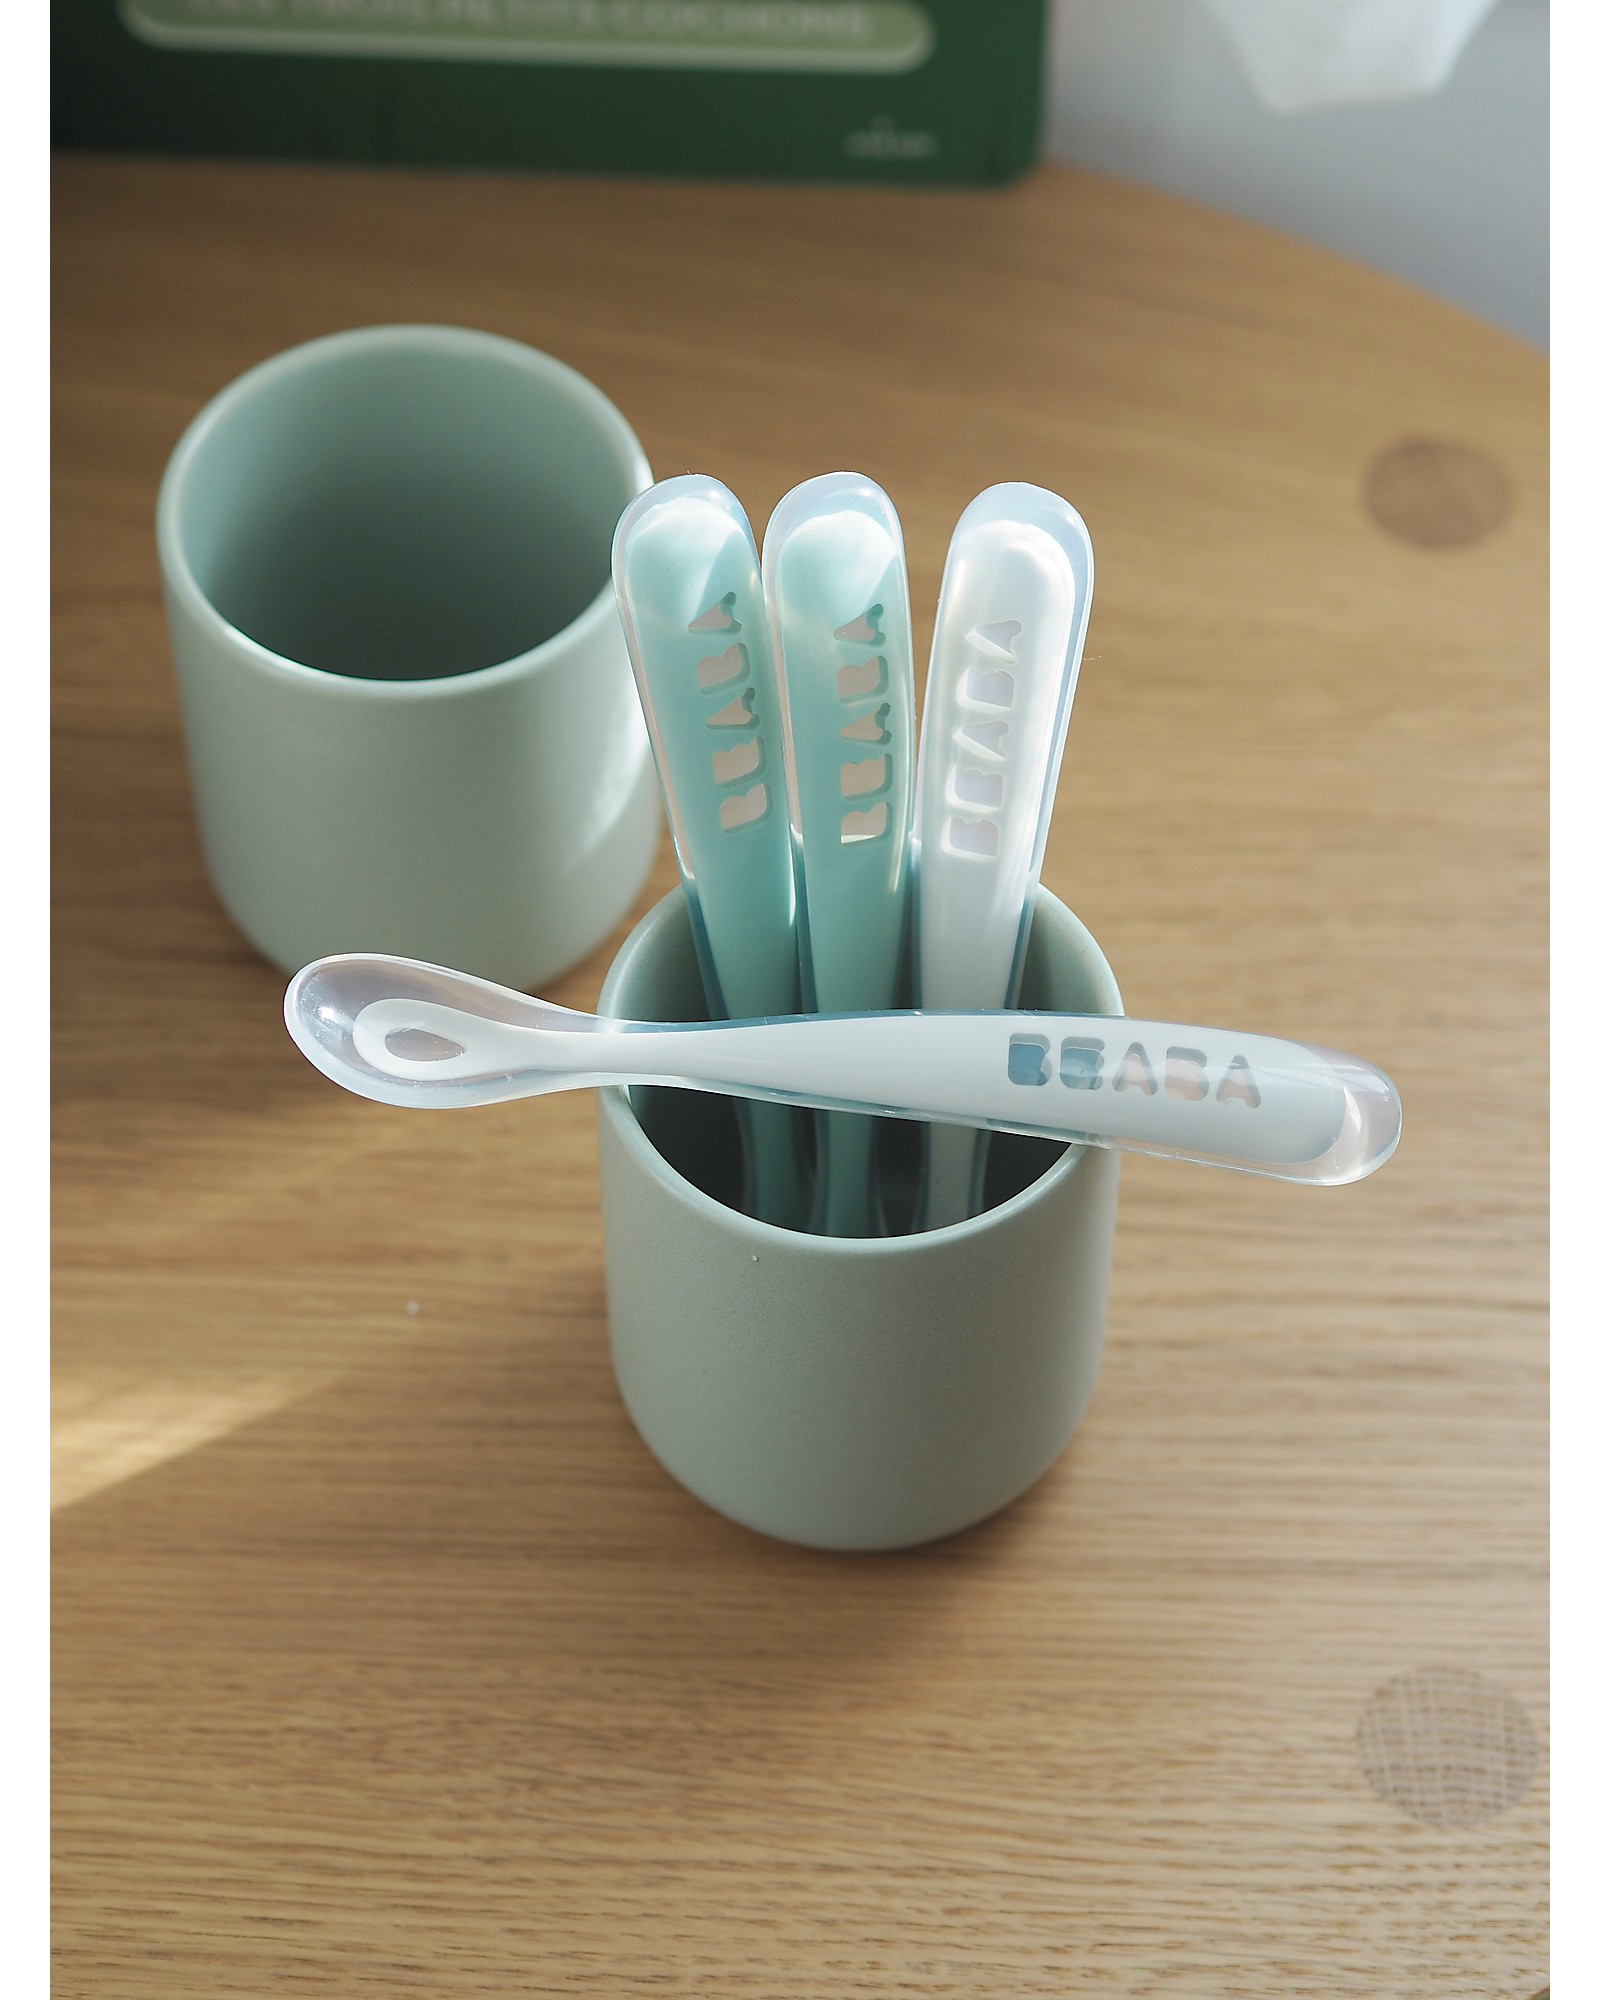 https://data.family-nation.com/imgprodotto/b%C3%A9aba-4-ergonomic-first-age-spoons-set-silicone-grey-and-sage-handy-for-adults-and-delicate-for-children-cutlery_445464_zoom.jpg